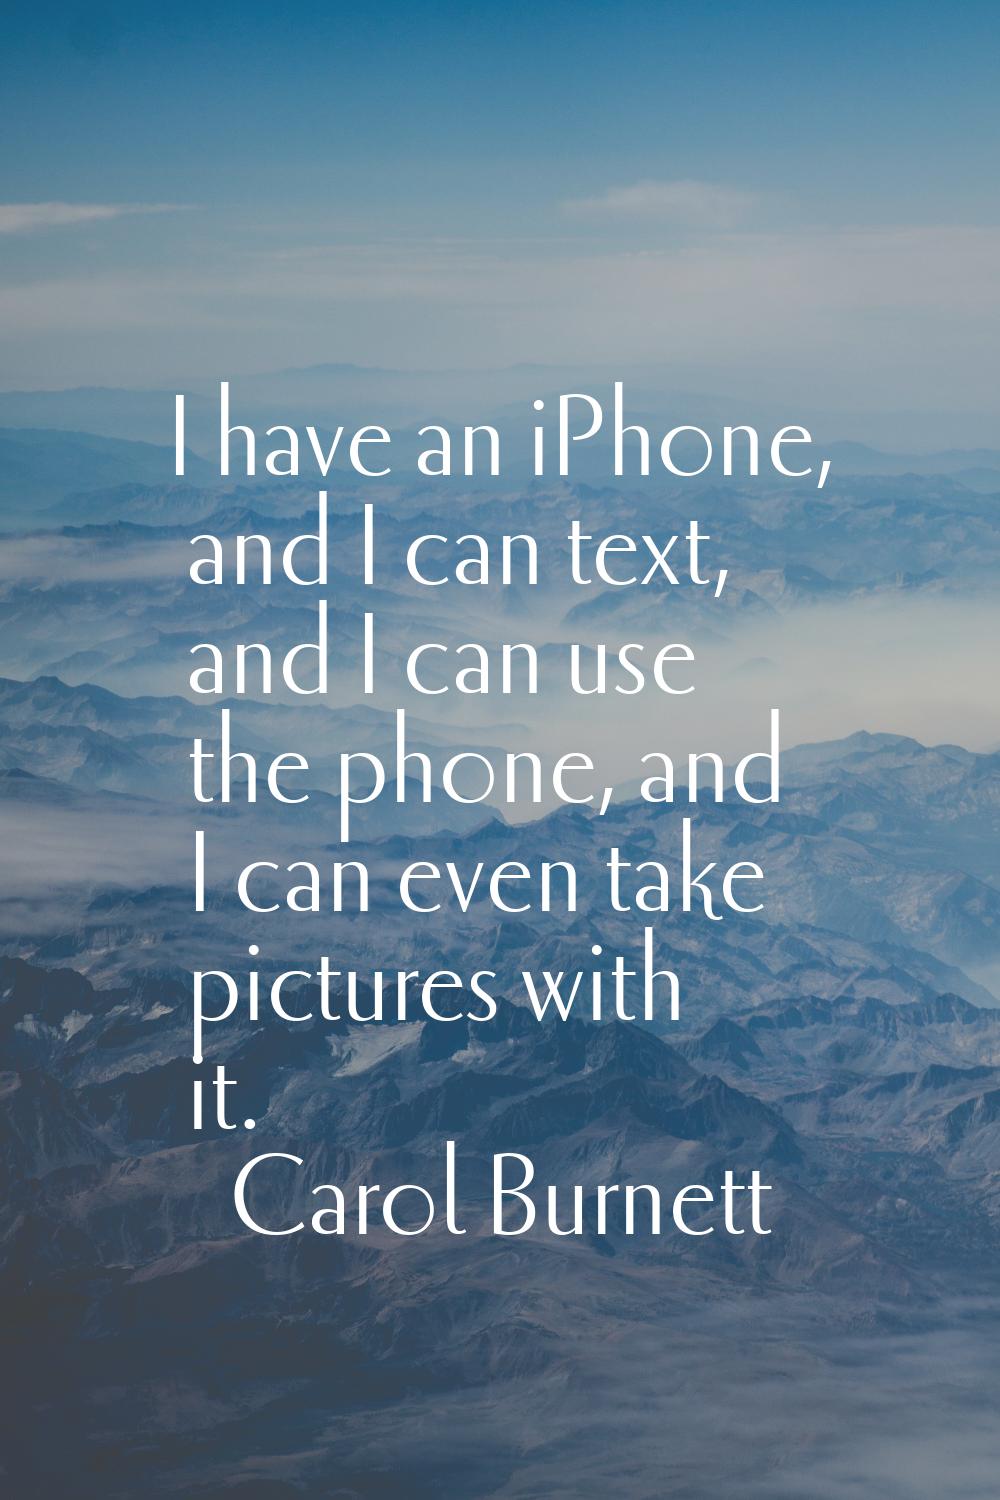 I have an iPhone, and I can text, and I can use the phone, and I can even take pictures with it.